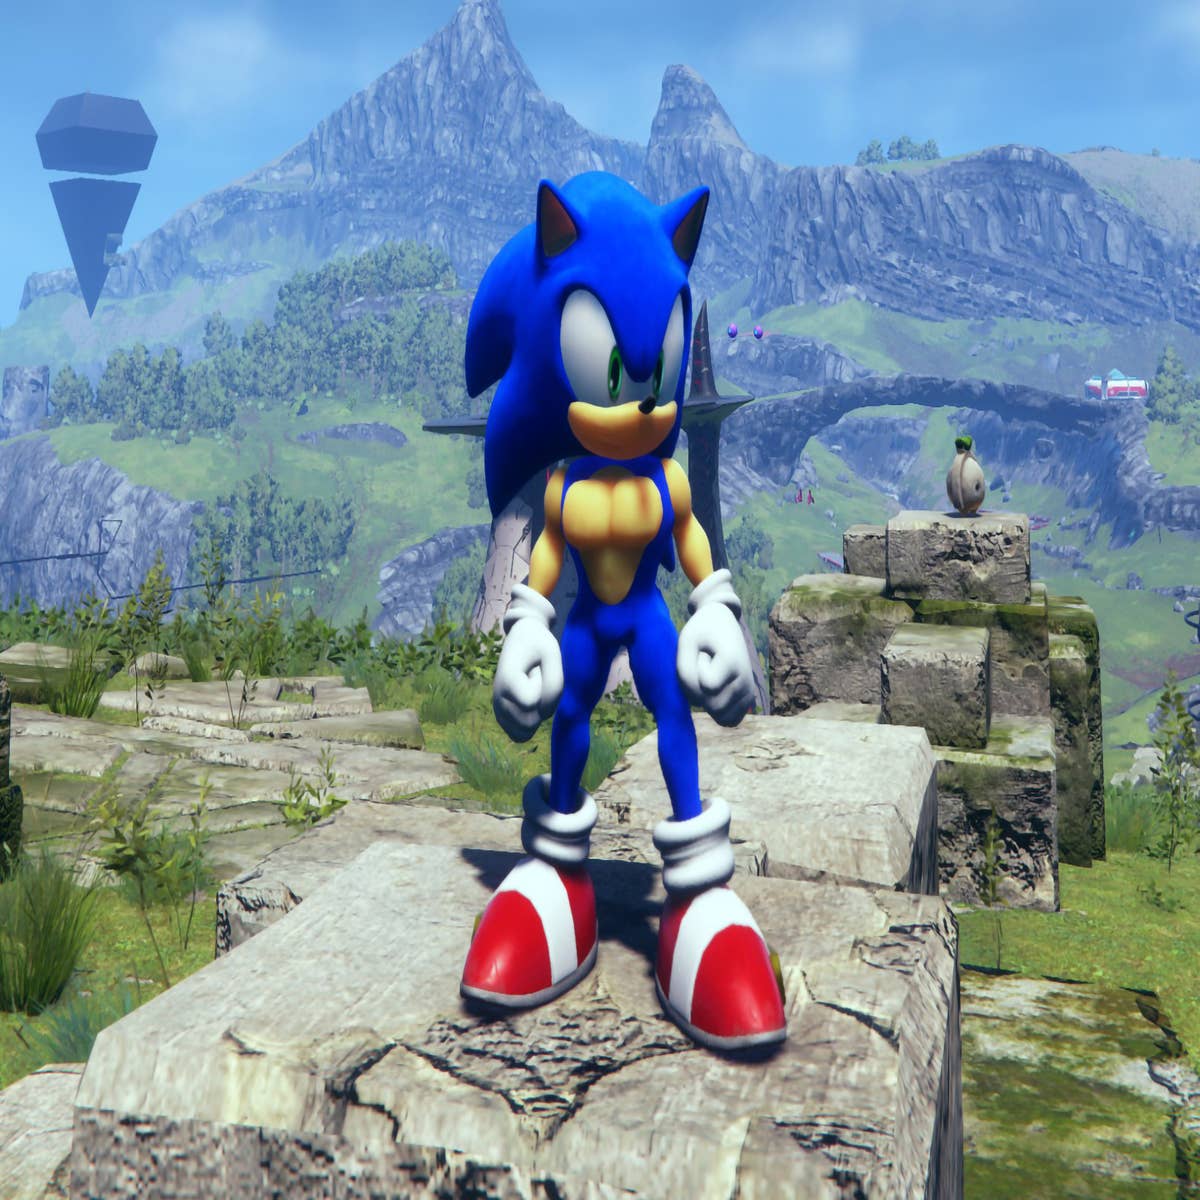 Sonic Frontiers Hedgehog May Cry Mod Tweaks Combat and Physics